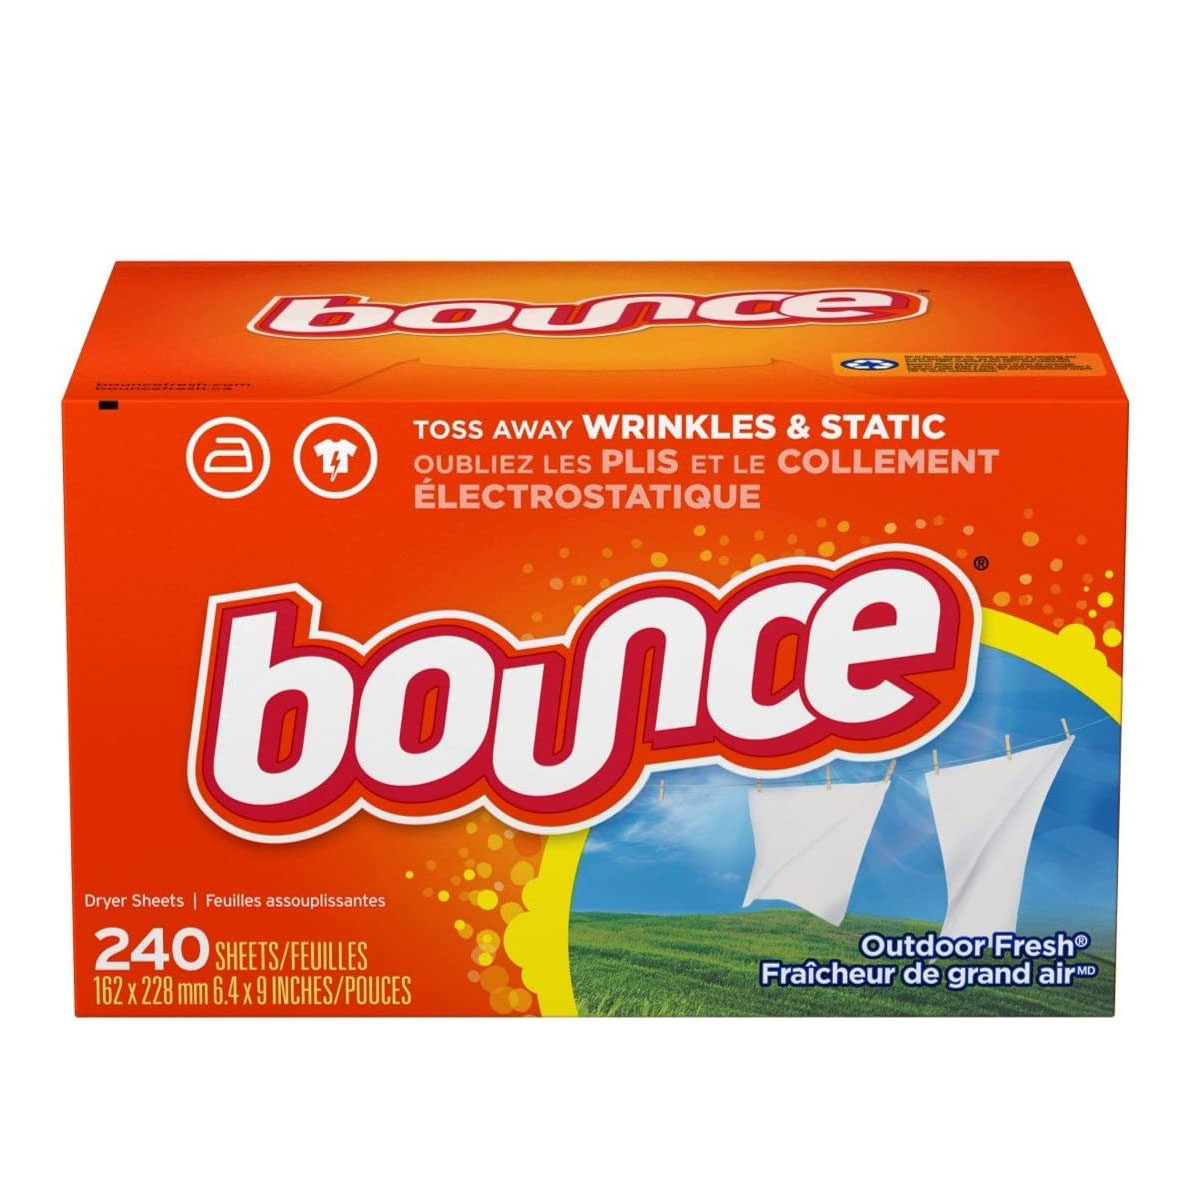 Best Fabric Softener Options: Bounce Fabric Softener and Dryer Sheets